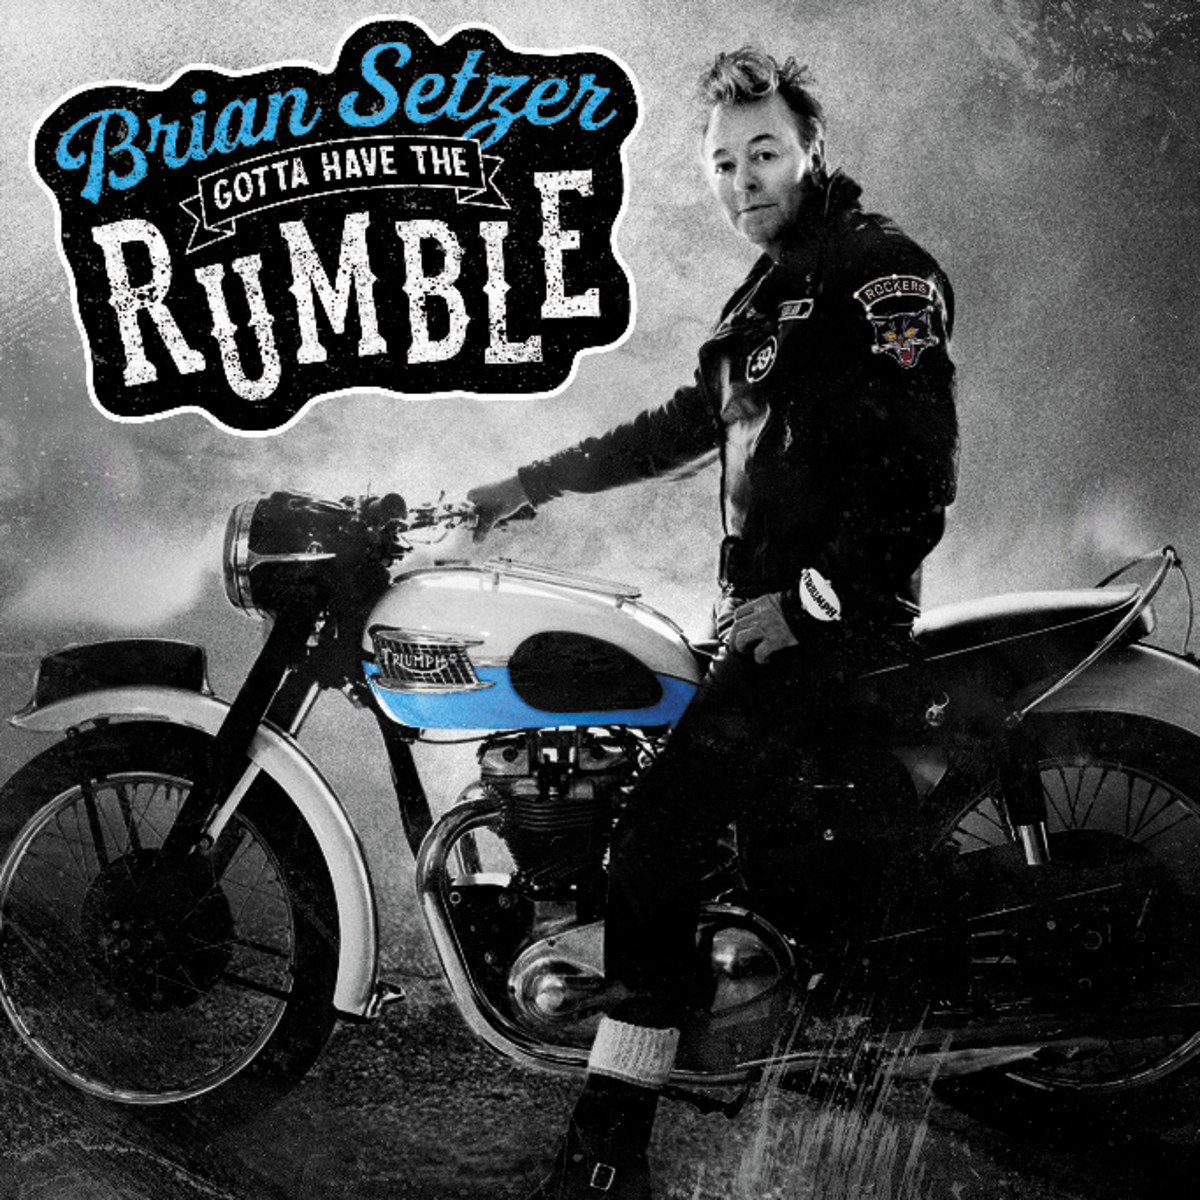 Brian Setzer's new album, Gotta Have the Rumble, is out now on vinyl.